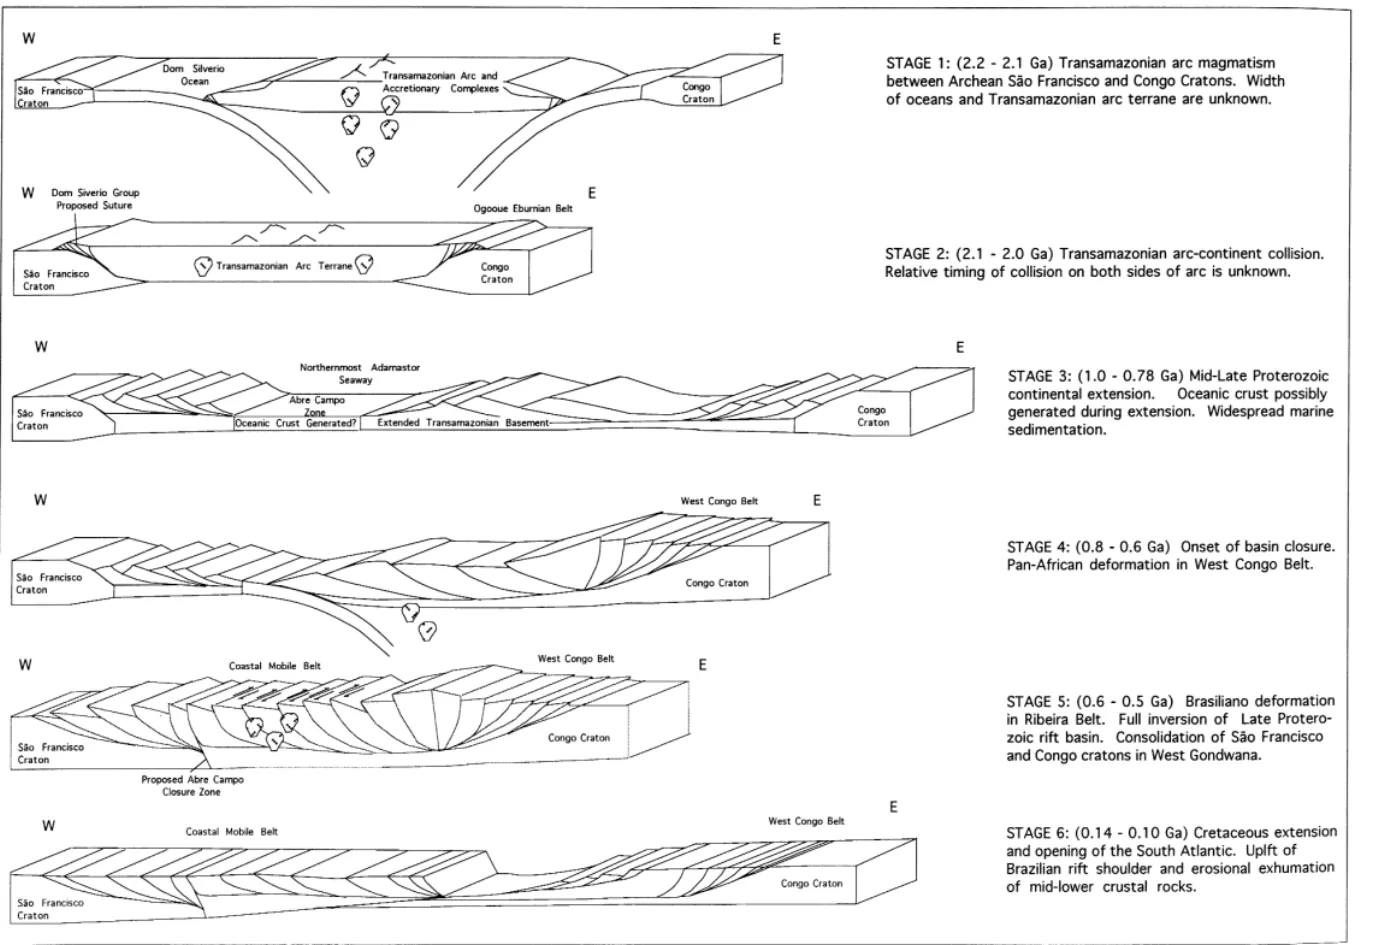 Fig. 13. Six-stage evolutionary model for structural development of Coastal Mobile Belt, eastern Brazil and consolidation of Sa˜o Francisco and Congo Cratons during Neoproterozoic–Early Phanerozoic.